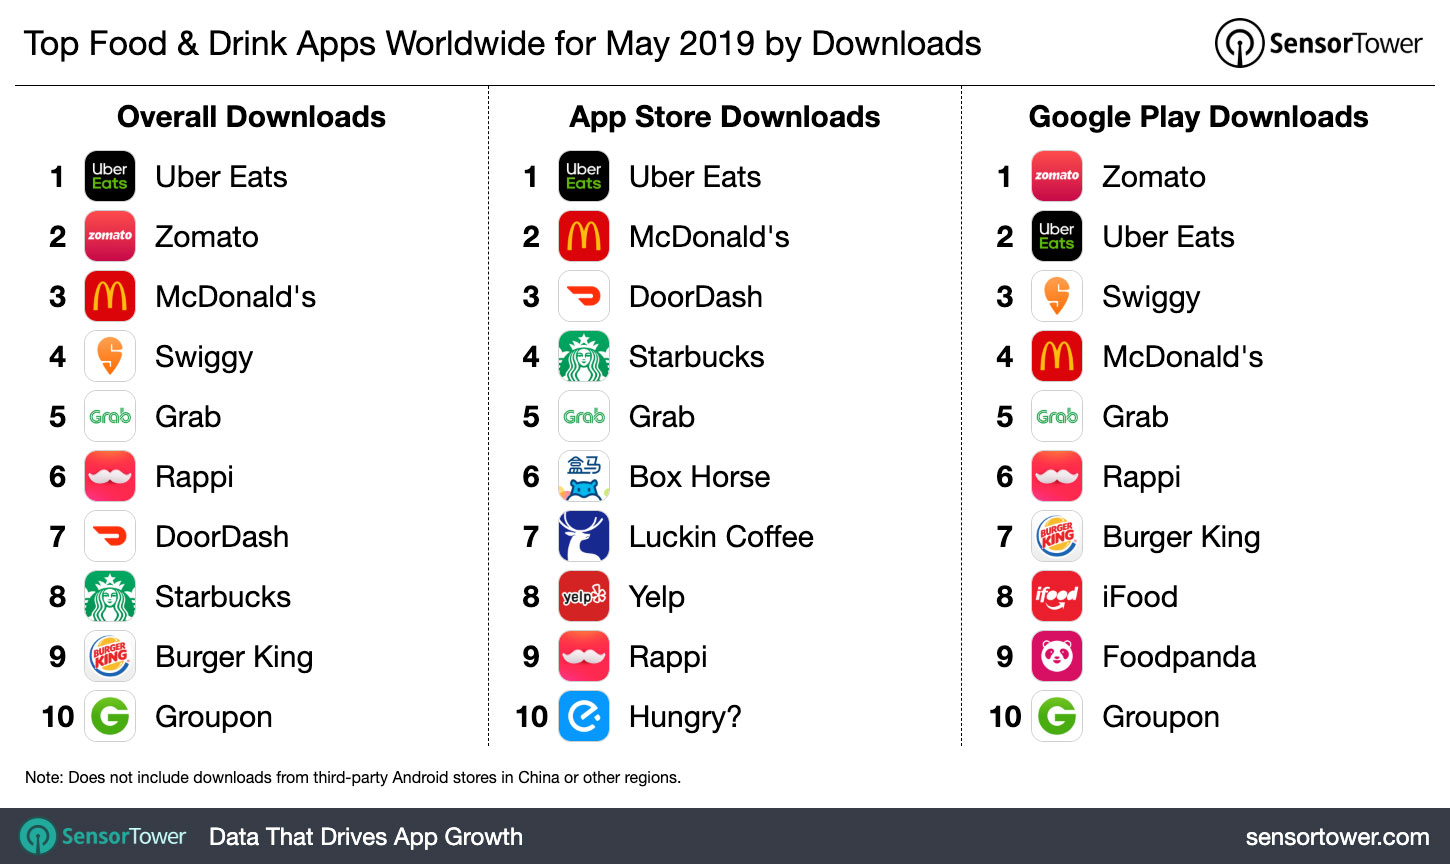 Top Food & Drink Apps Worldwide for May 2019 by Downloads